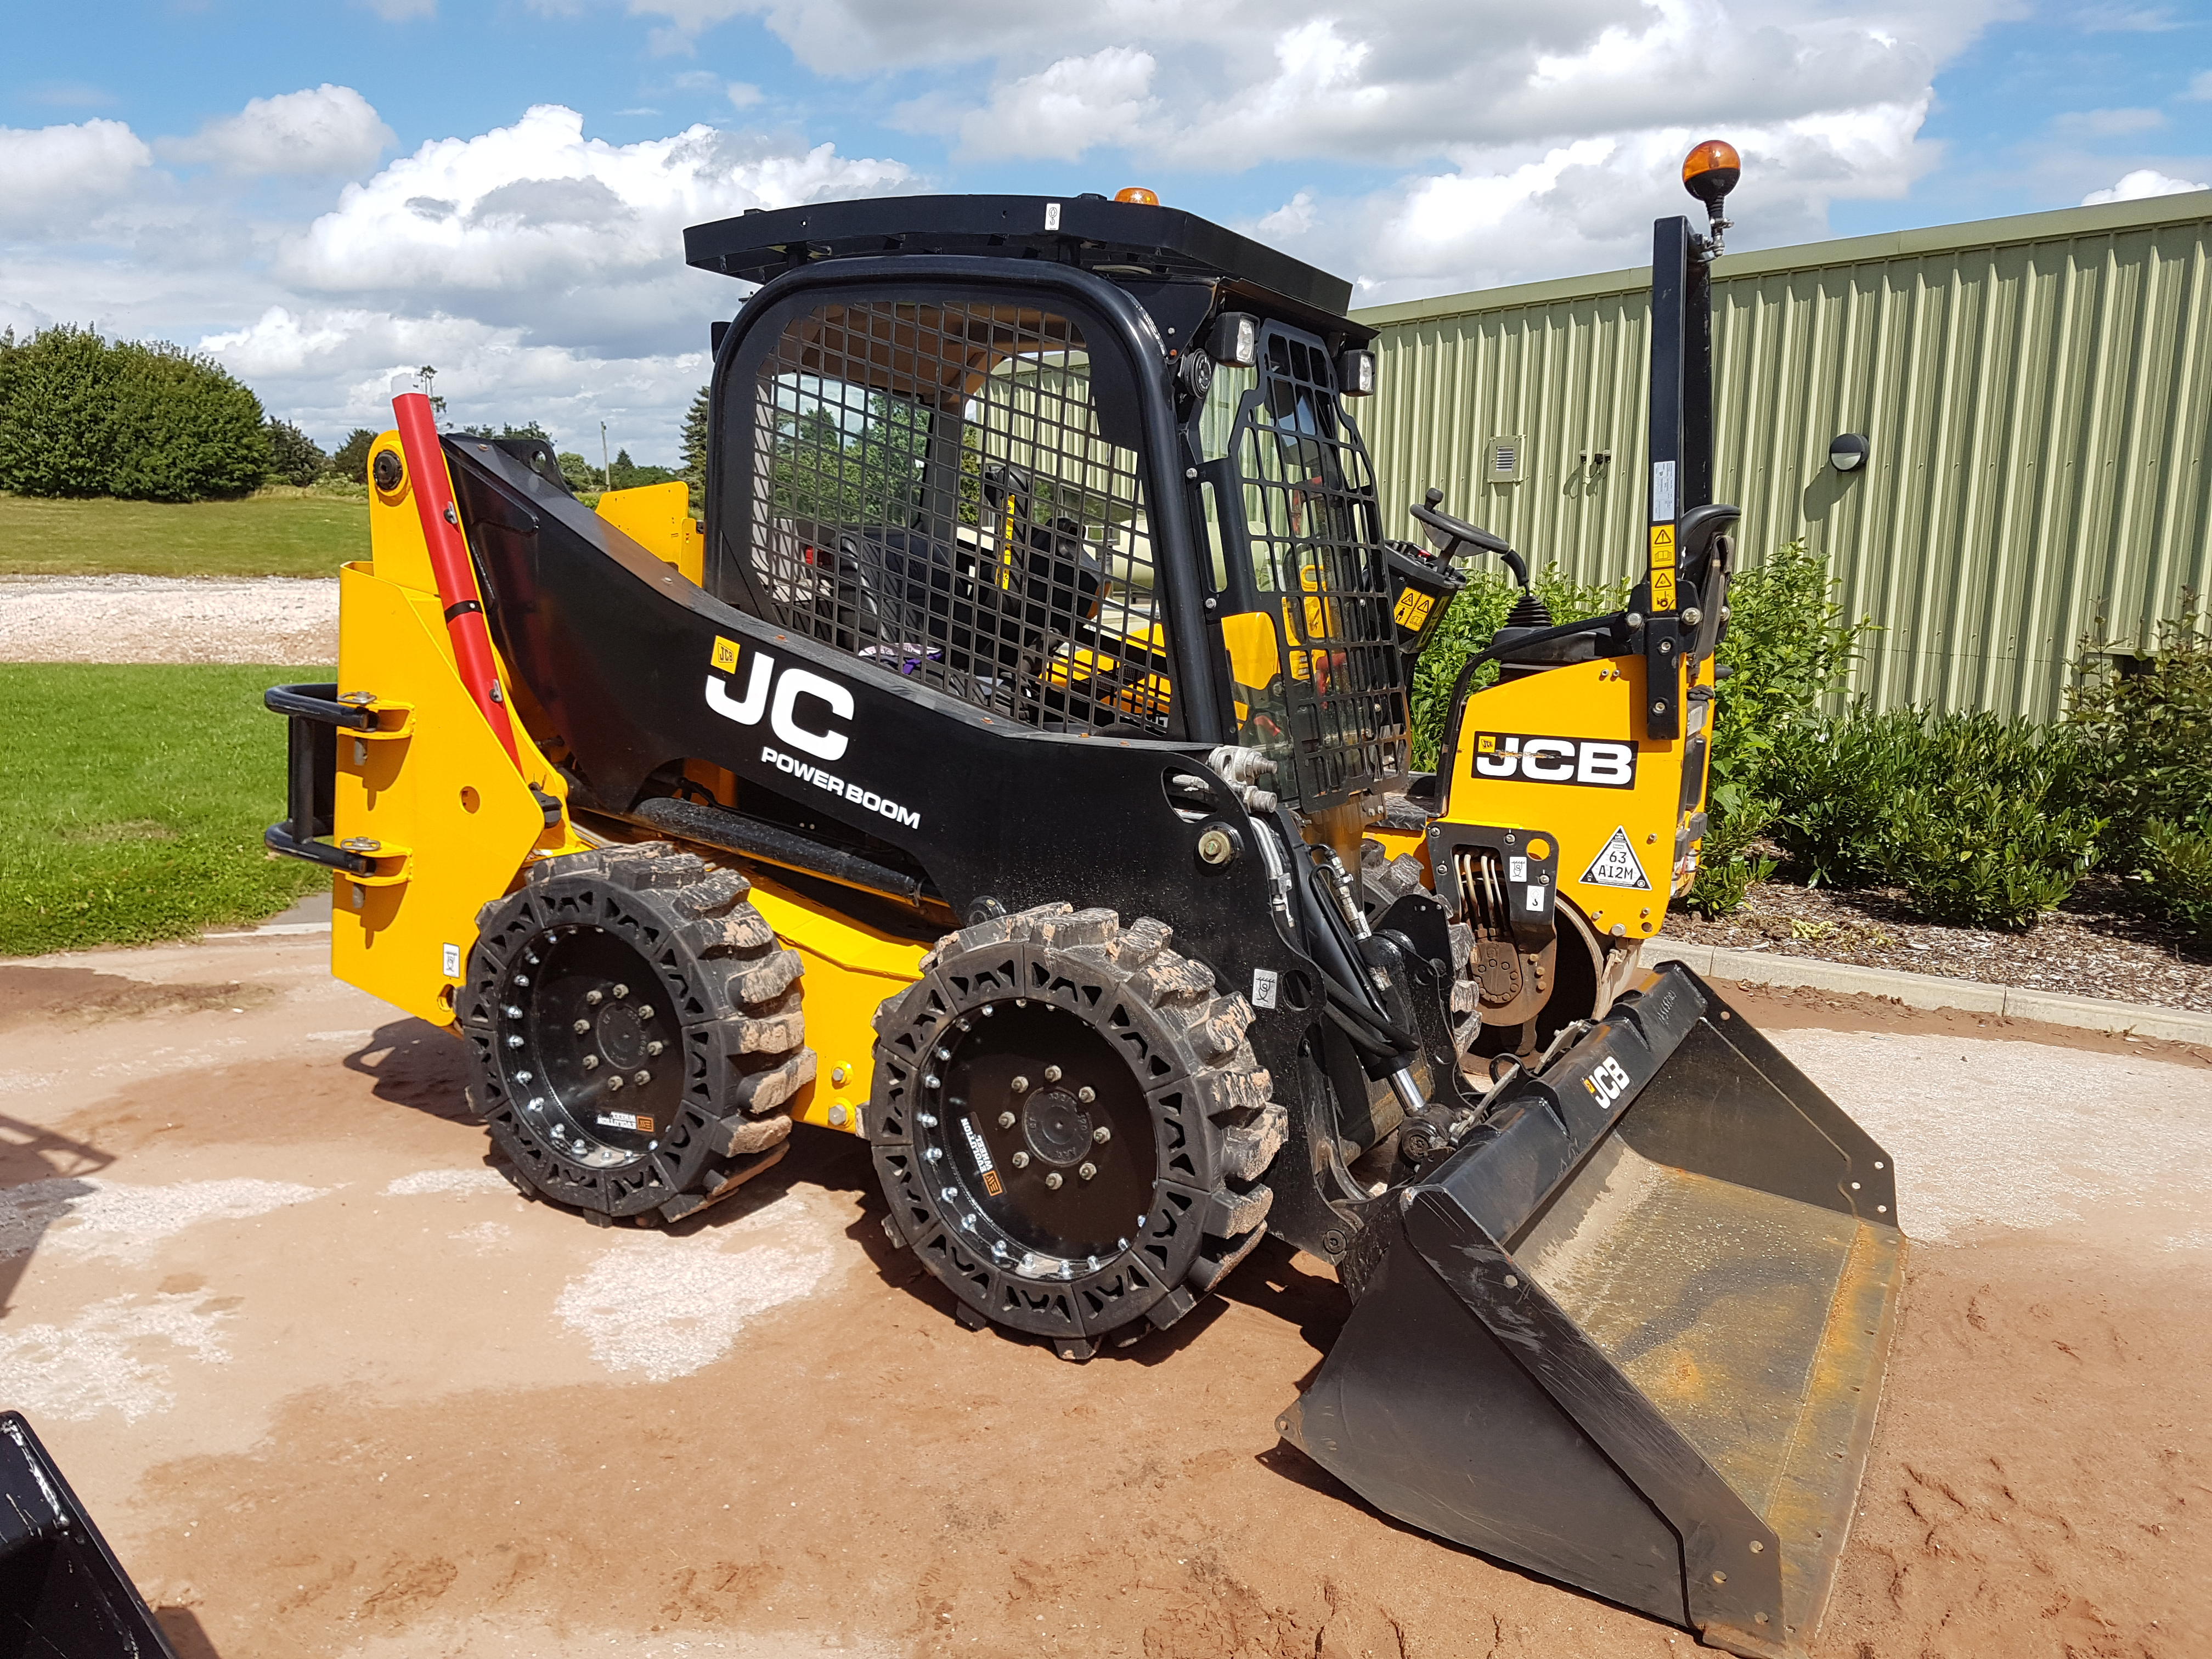 This images shows a yellow JCB Skid Steer using our 12x16 5 Bobcat Tires